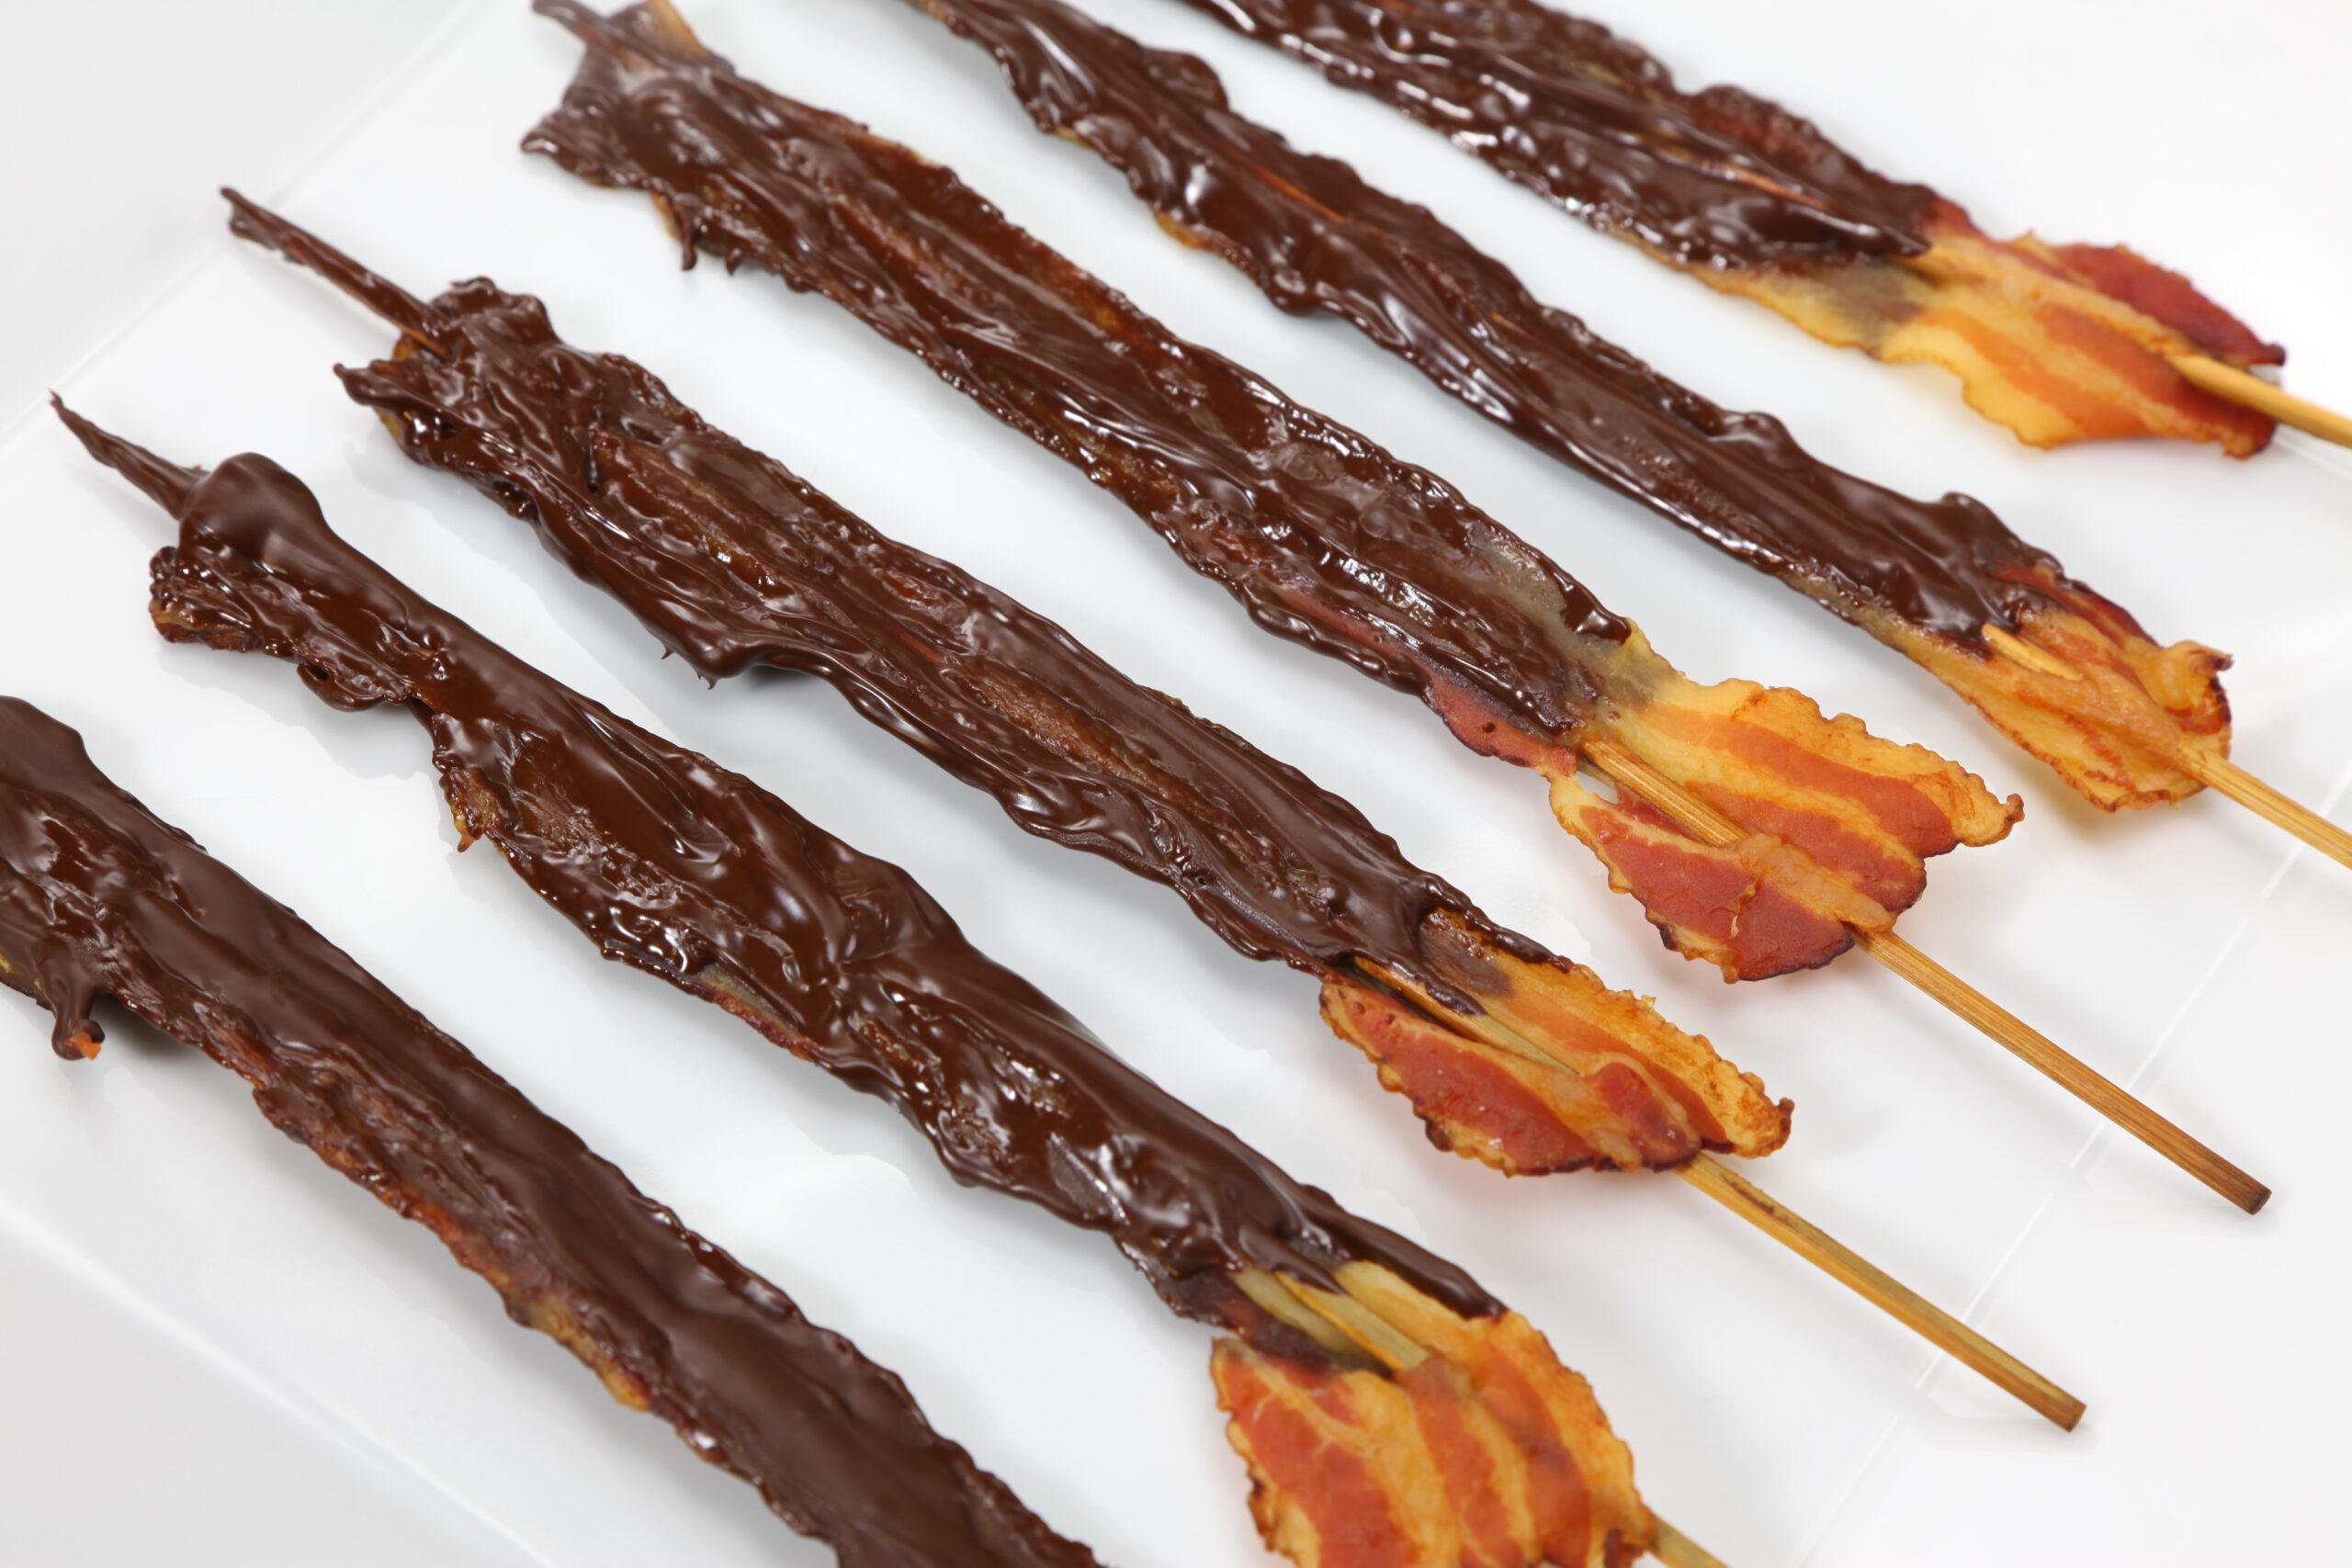 crispy Bacon dipped in chocolate on sticks